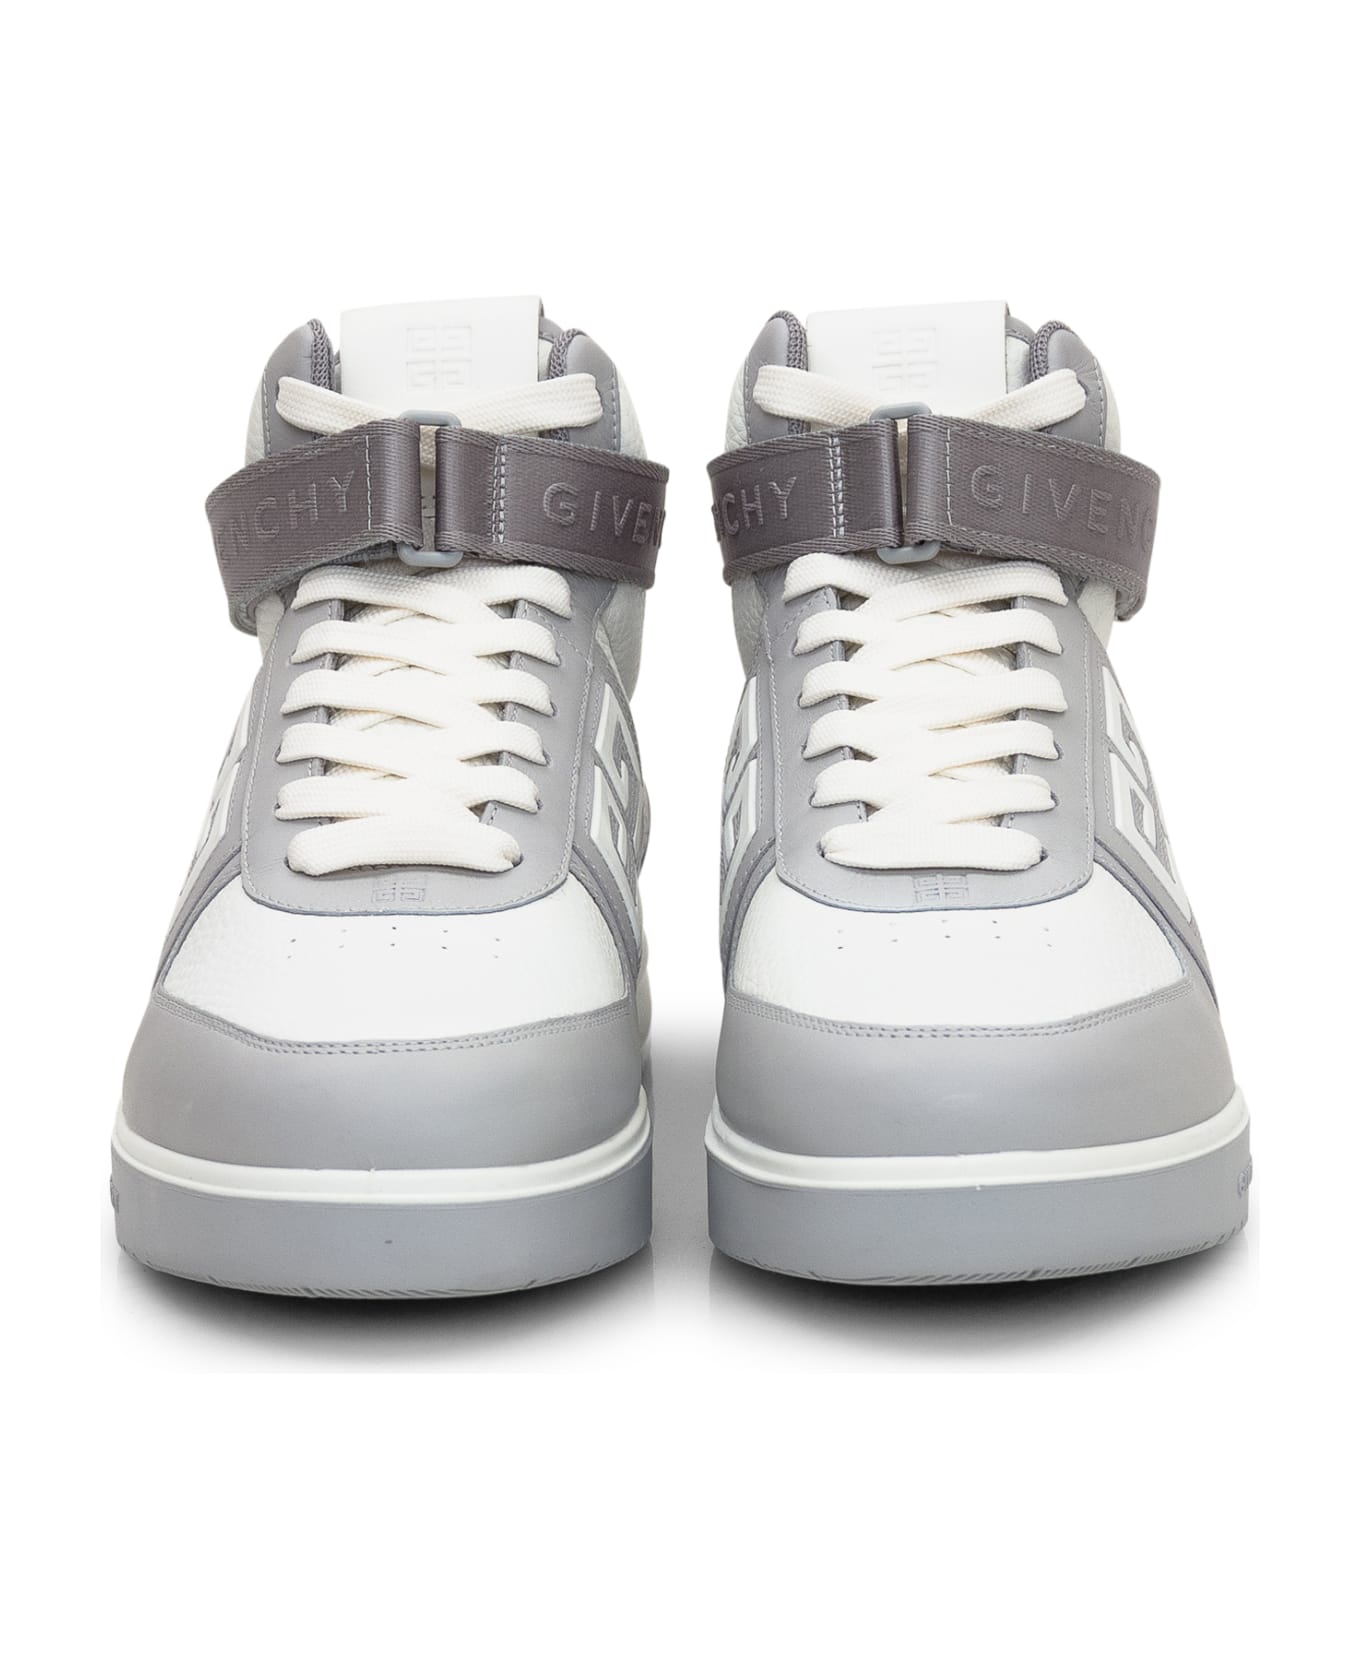 Givenchy G4 High Sneaker - Grey